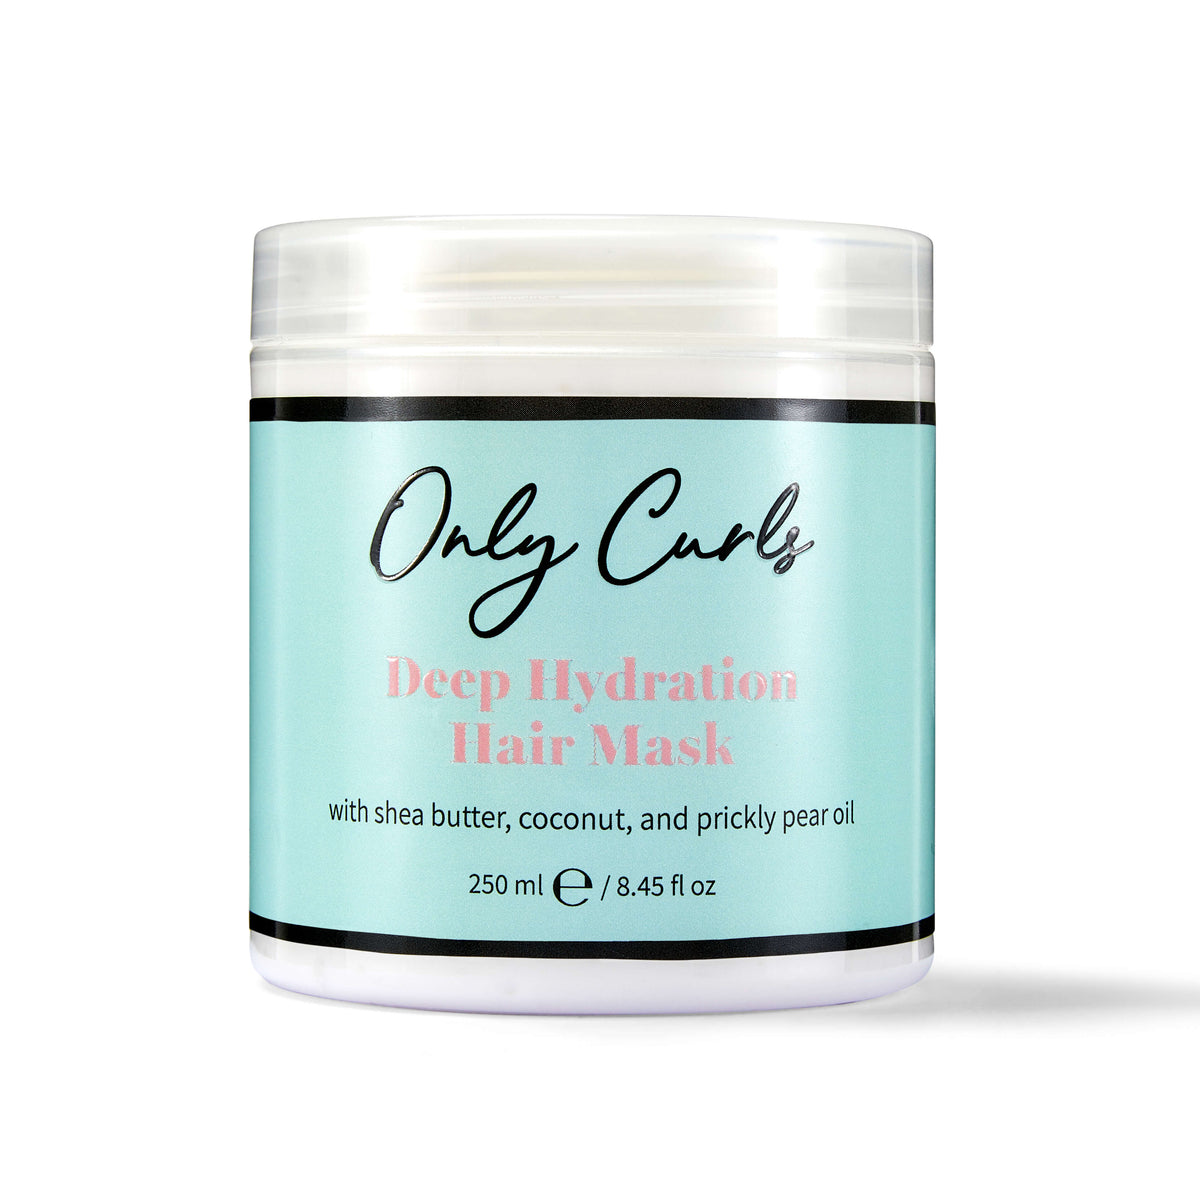 Only Curls Deep Hydration Hair Mask - Only Curls